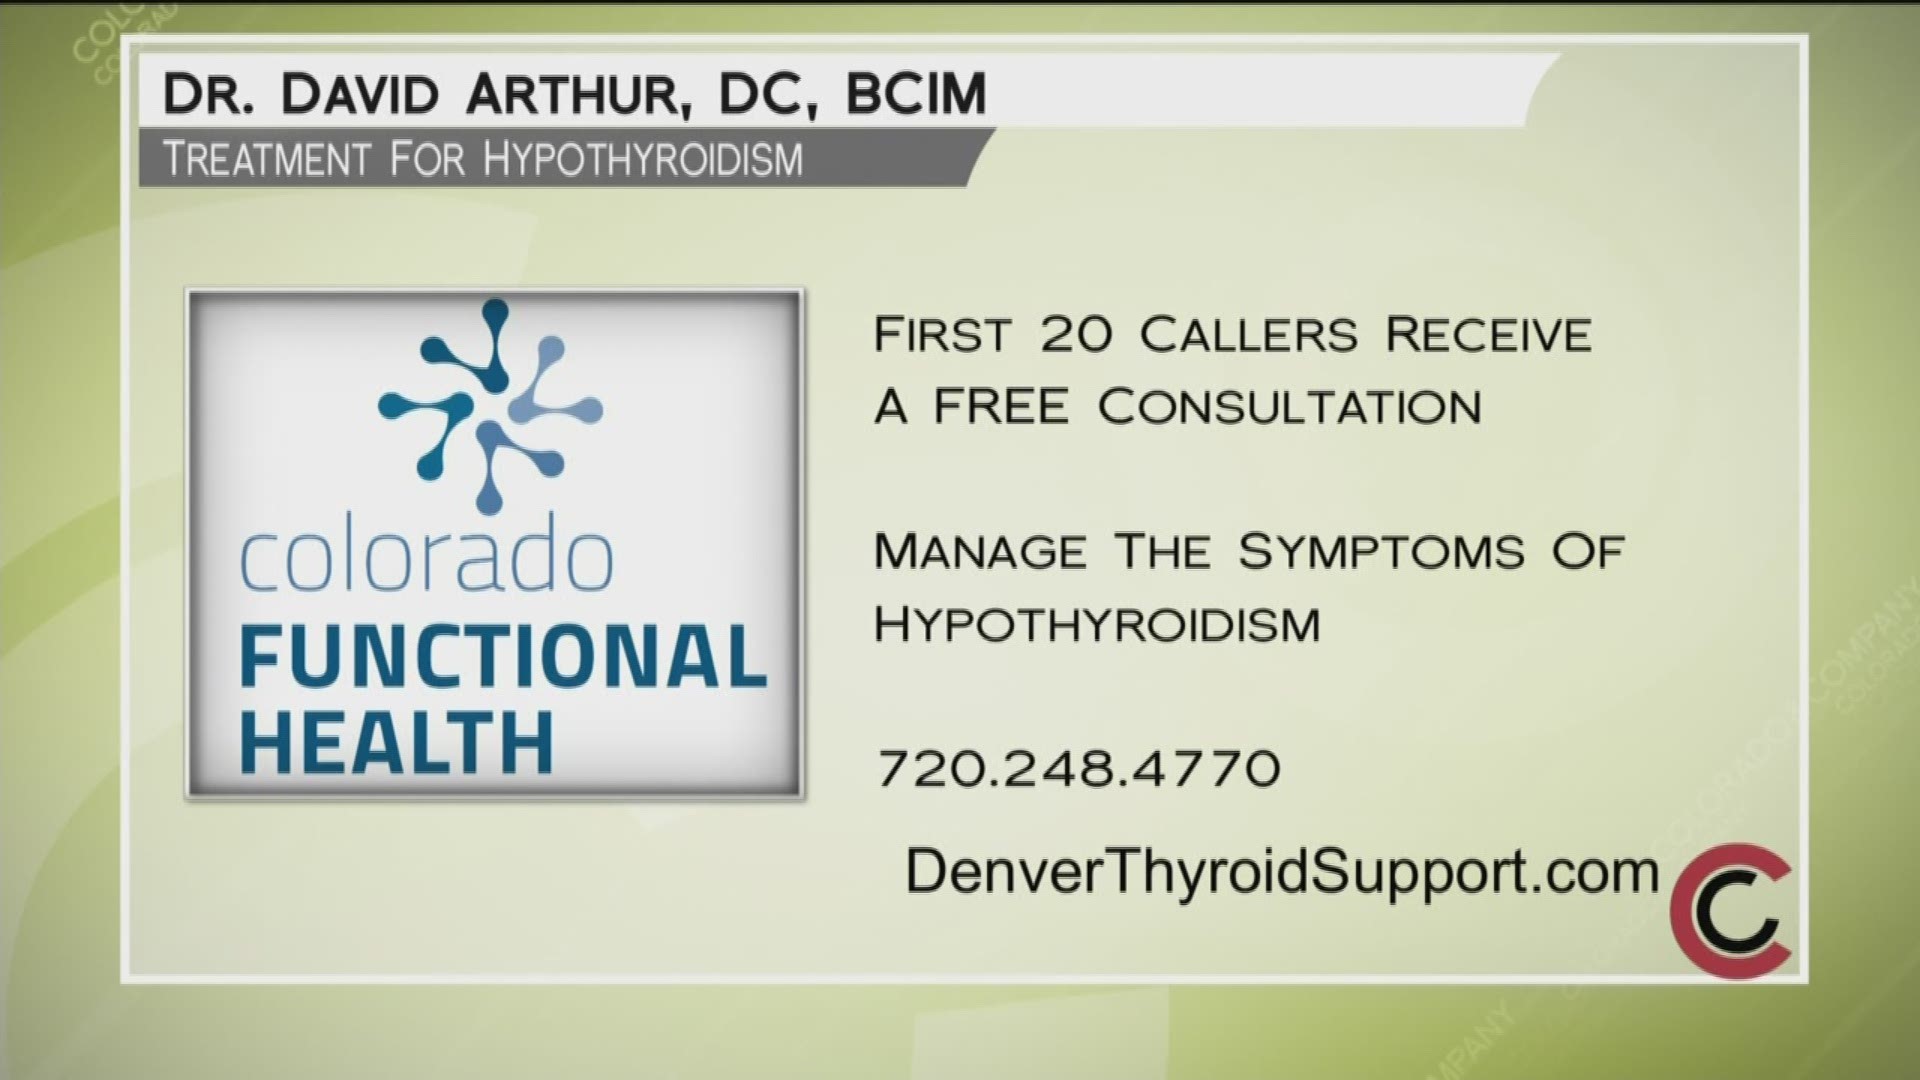 Call Dr. Arthur at 720.248.4770 and book your consultation today. The first 20 callers will get theirs for free! Learn more at DenverThyroidSupport.com.